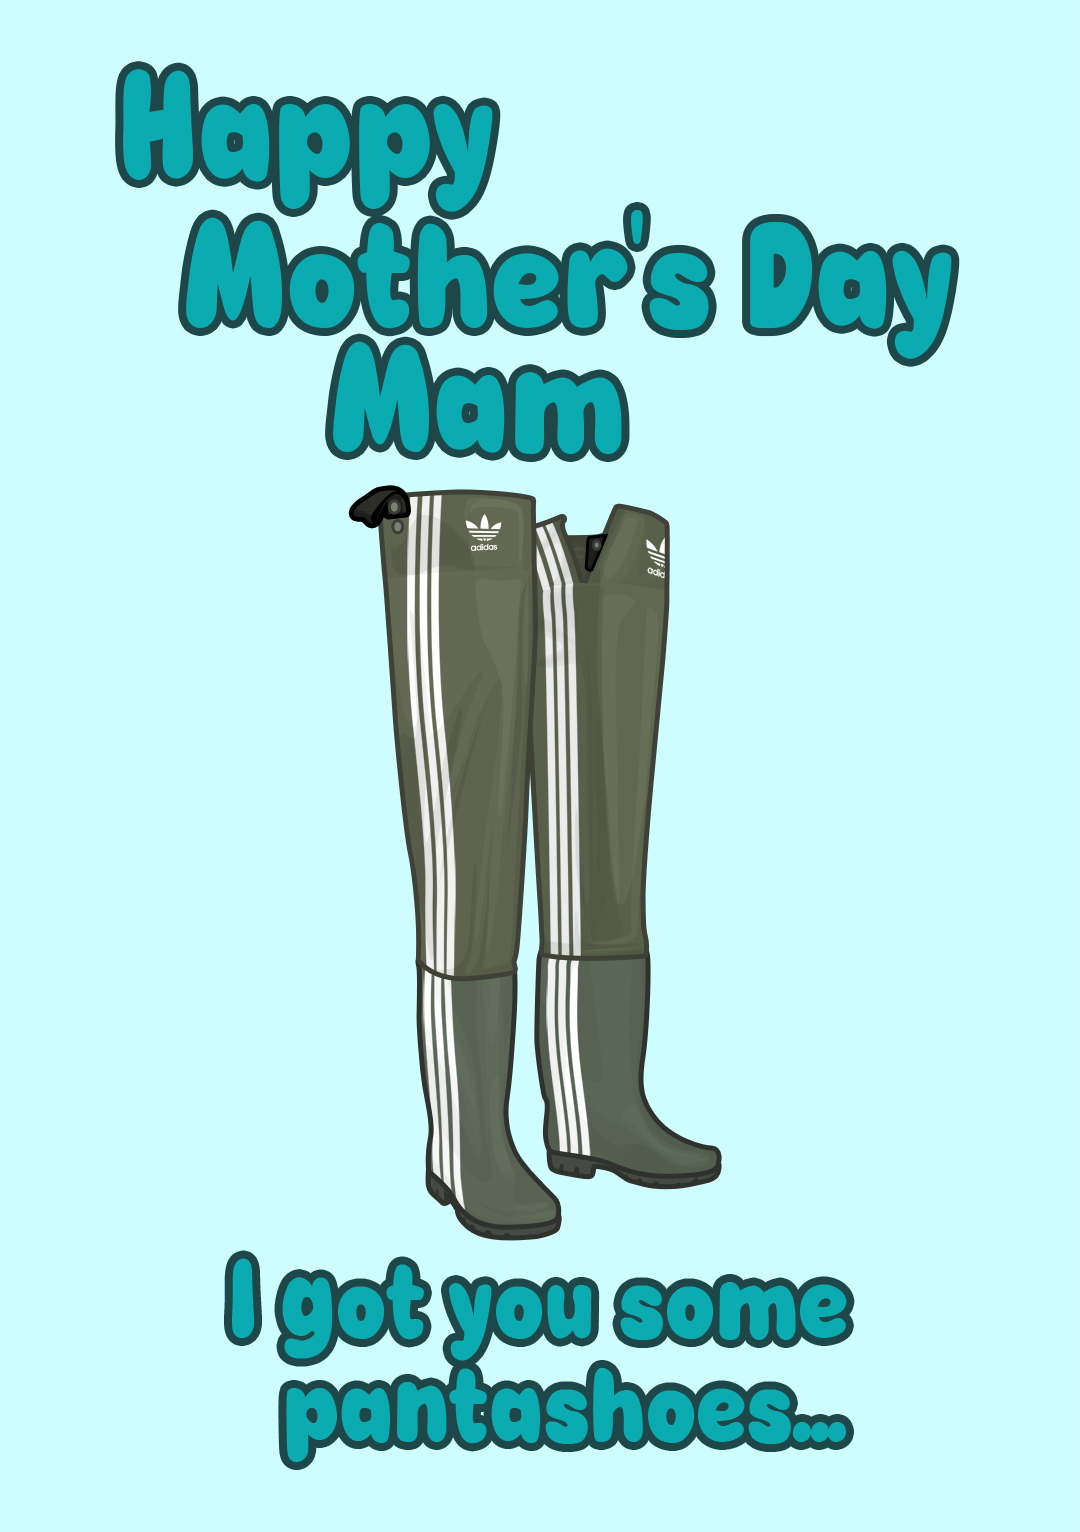 I Got You Some Pantashoes...Happy Mother's Day!